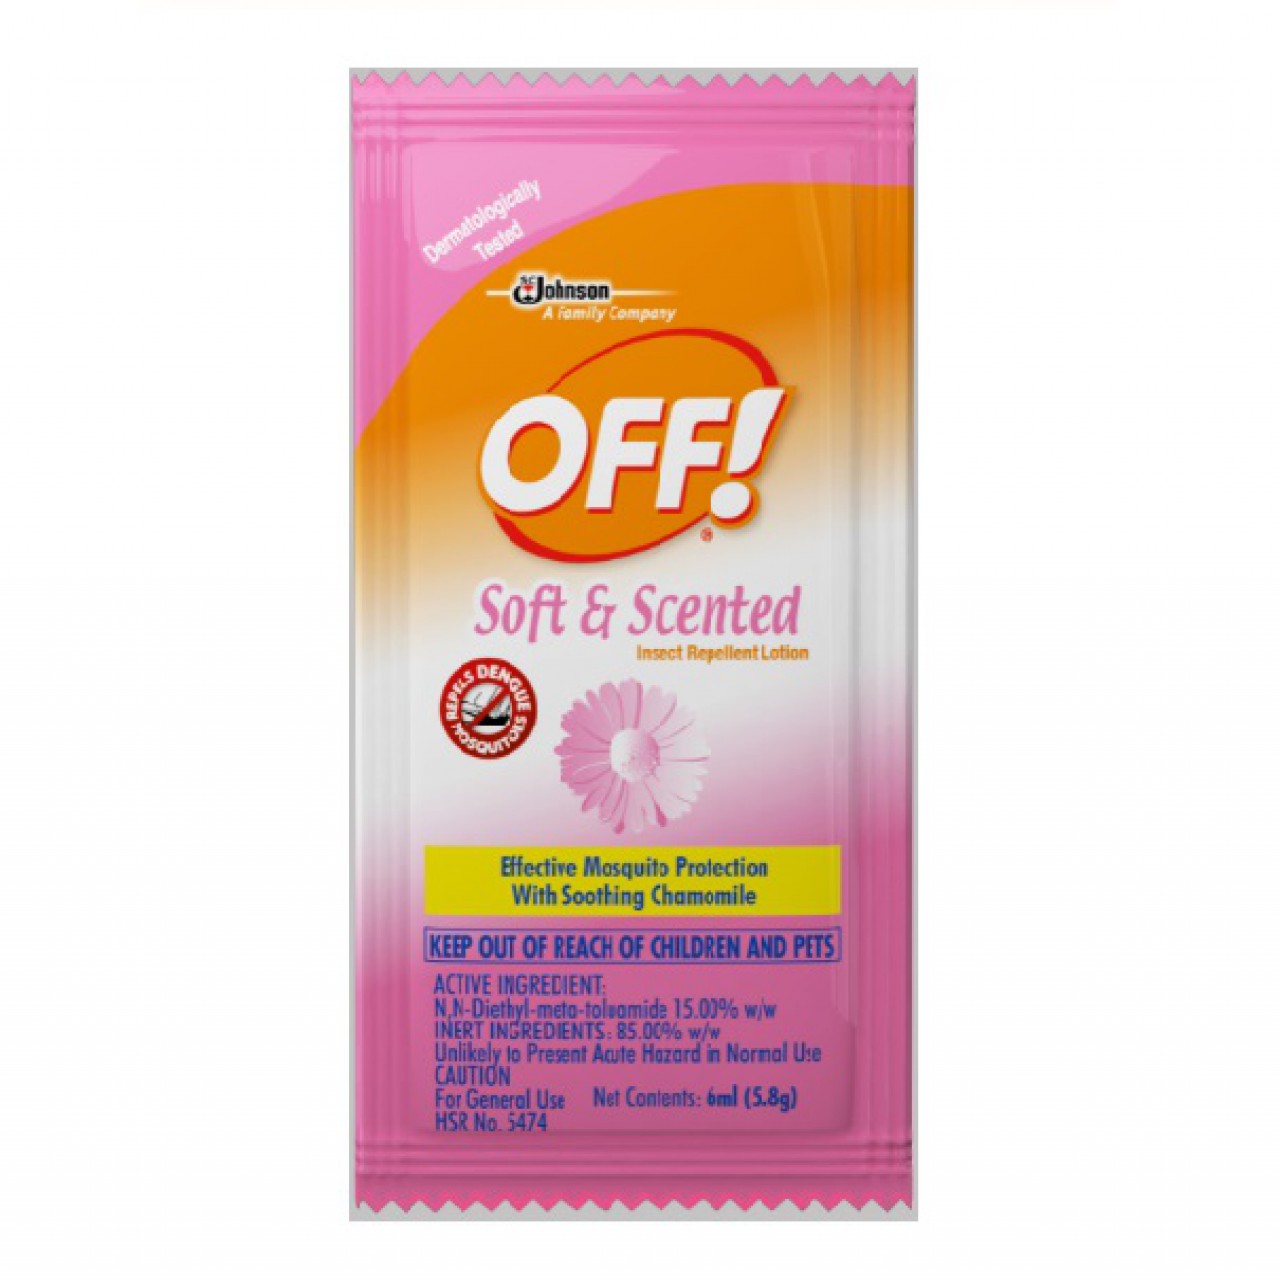 OFF! LOT SOFT & SCENTD 6ML 12S